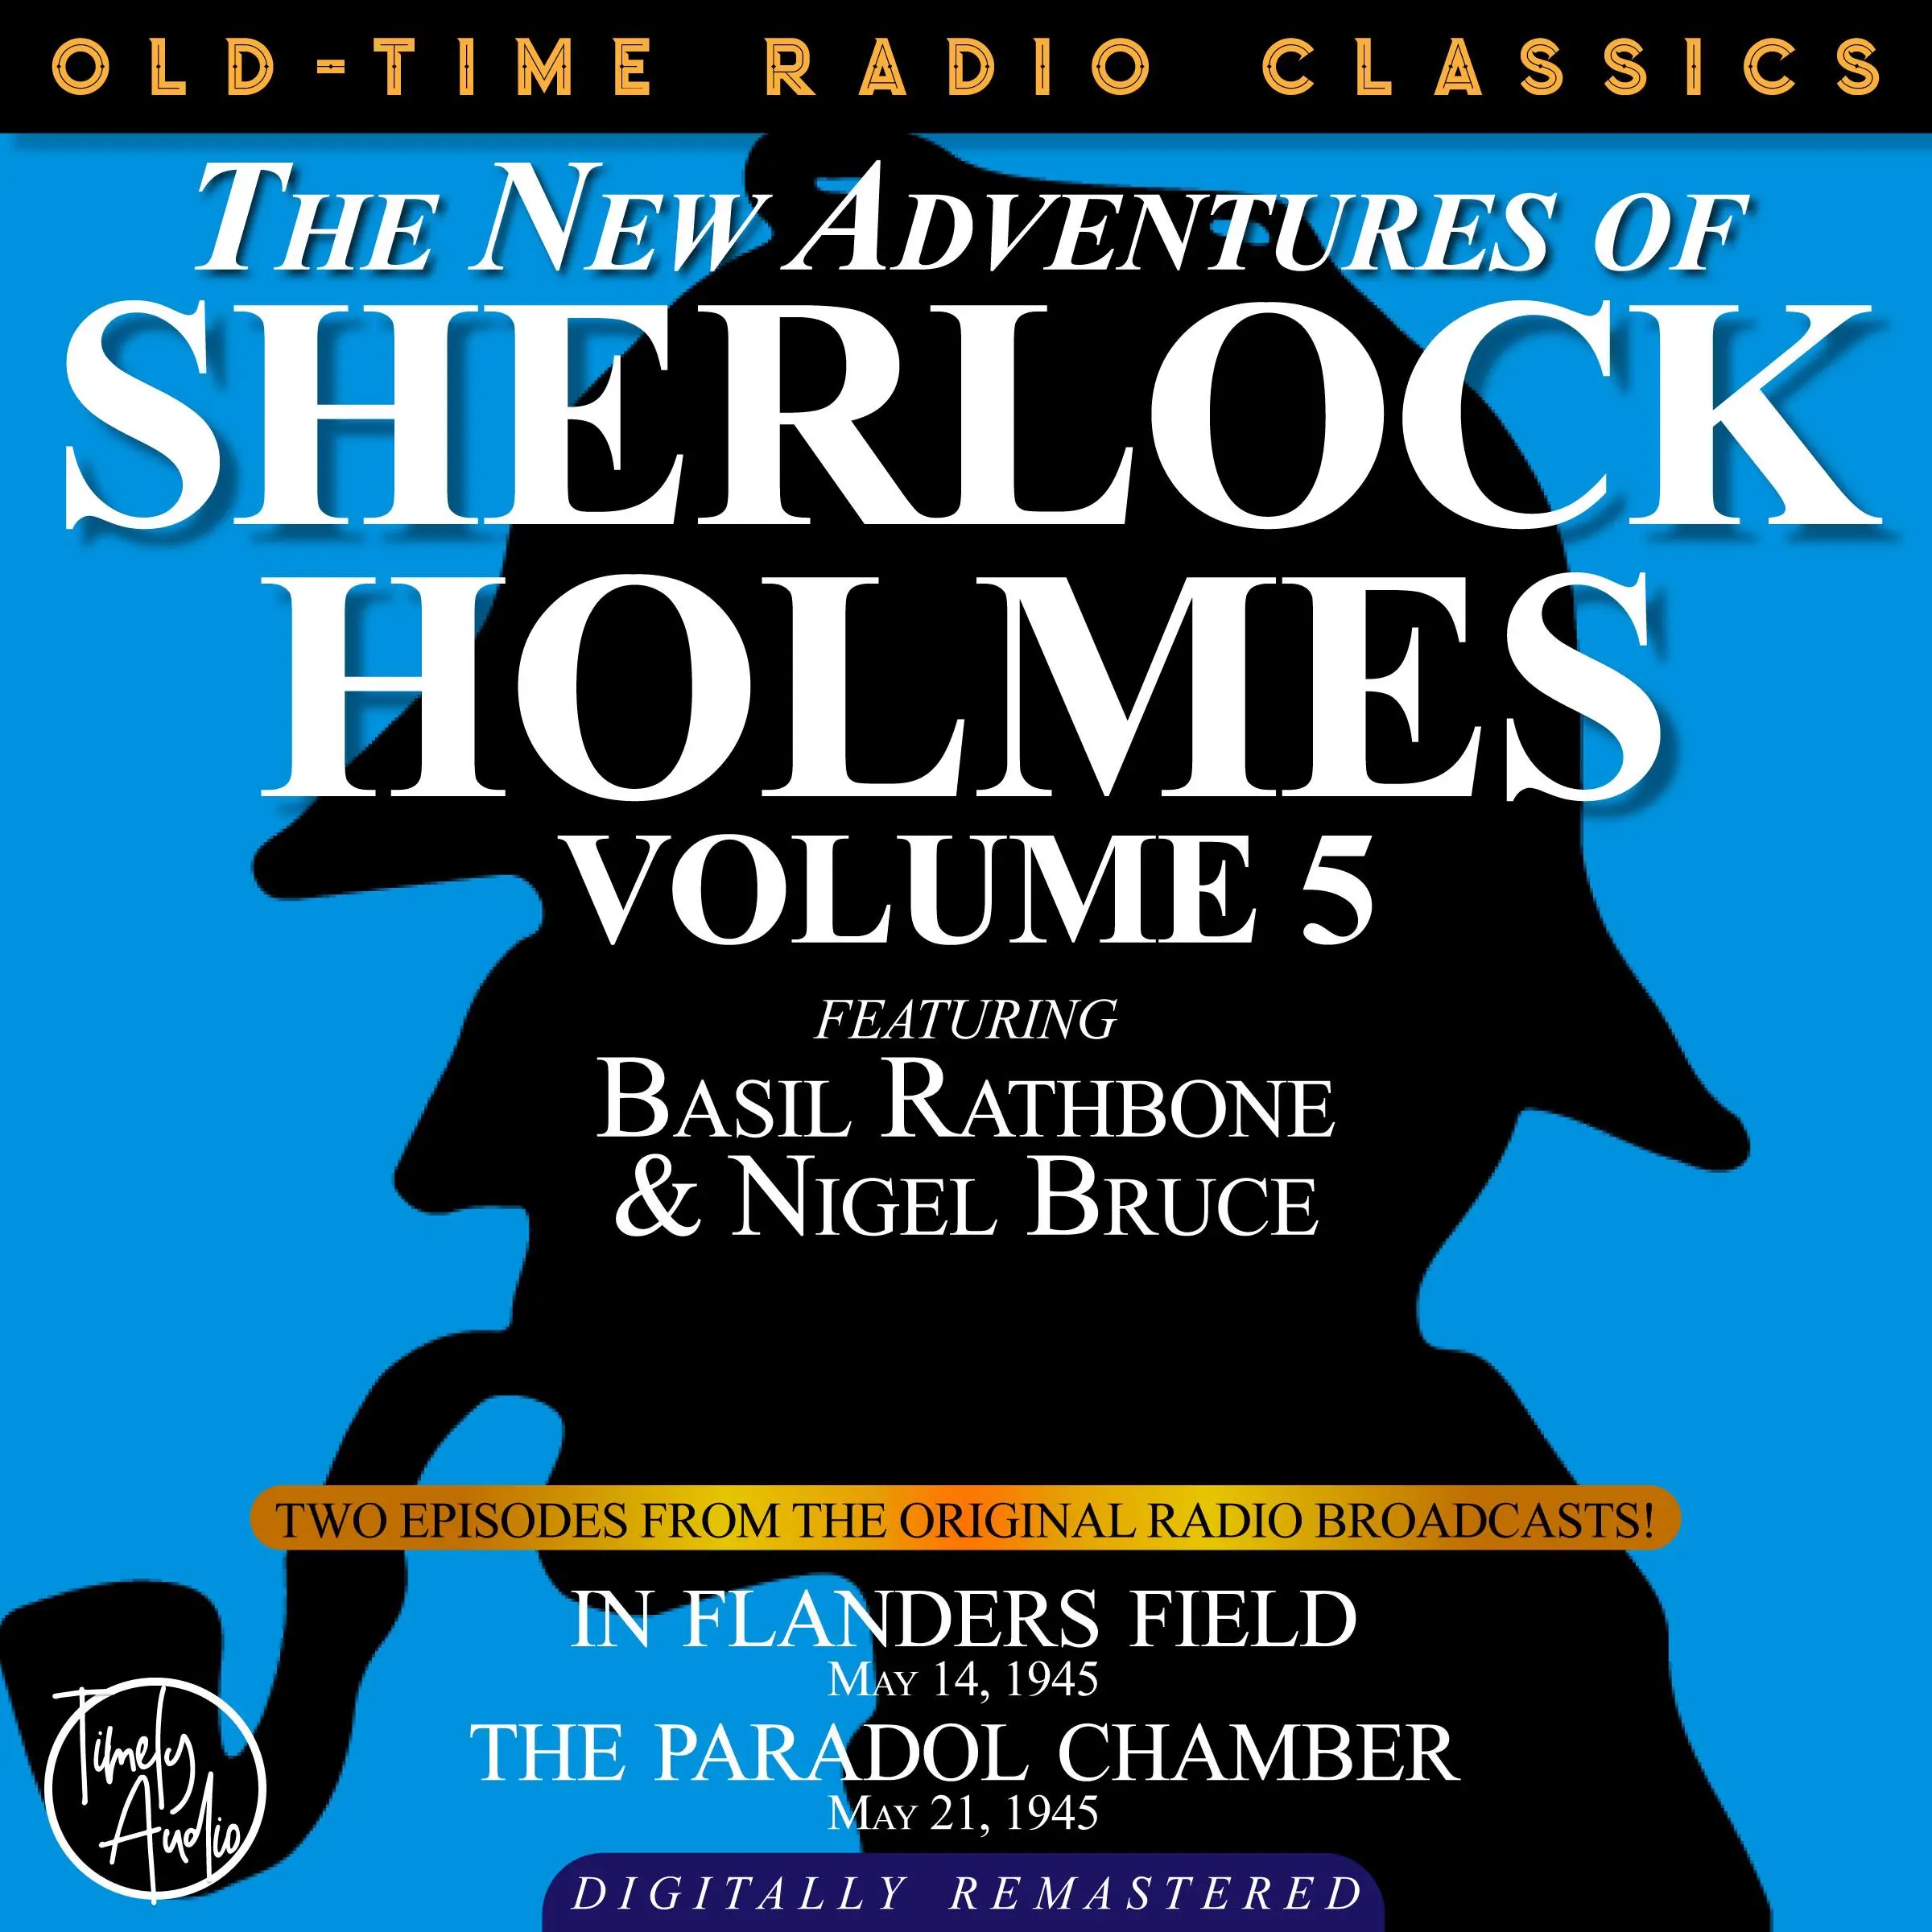 THE NEW ADVENTURES OF SHERLOCK HOLMES, VOLUME 5:EPISODE 1: IN FLANDERS FIELD EPISODE 2: THE PARADOL CHAMBER by Sir Arthur Conan Doyle Audiobook